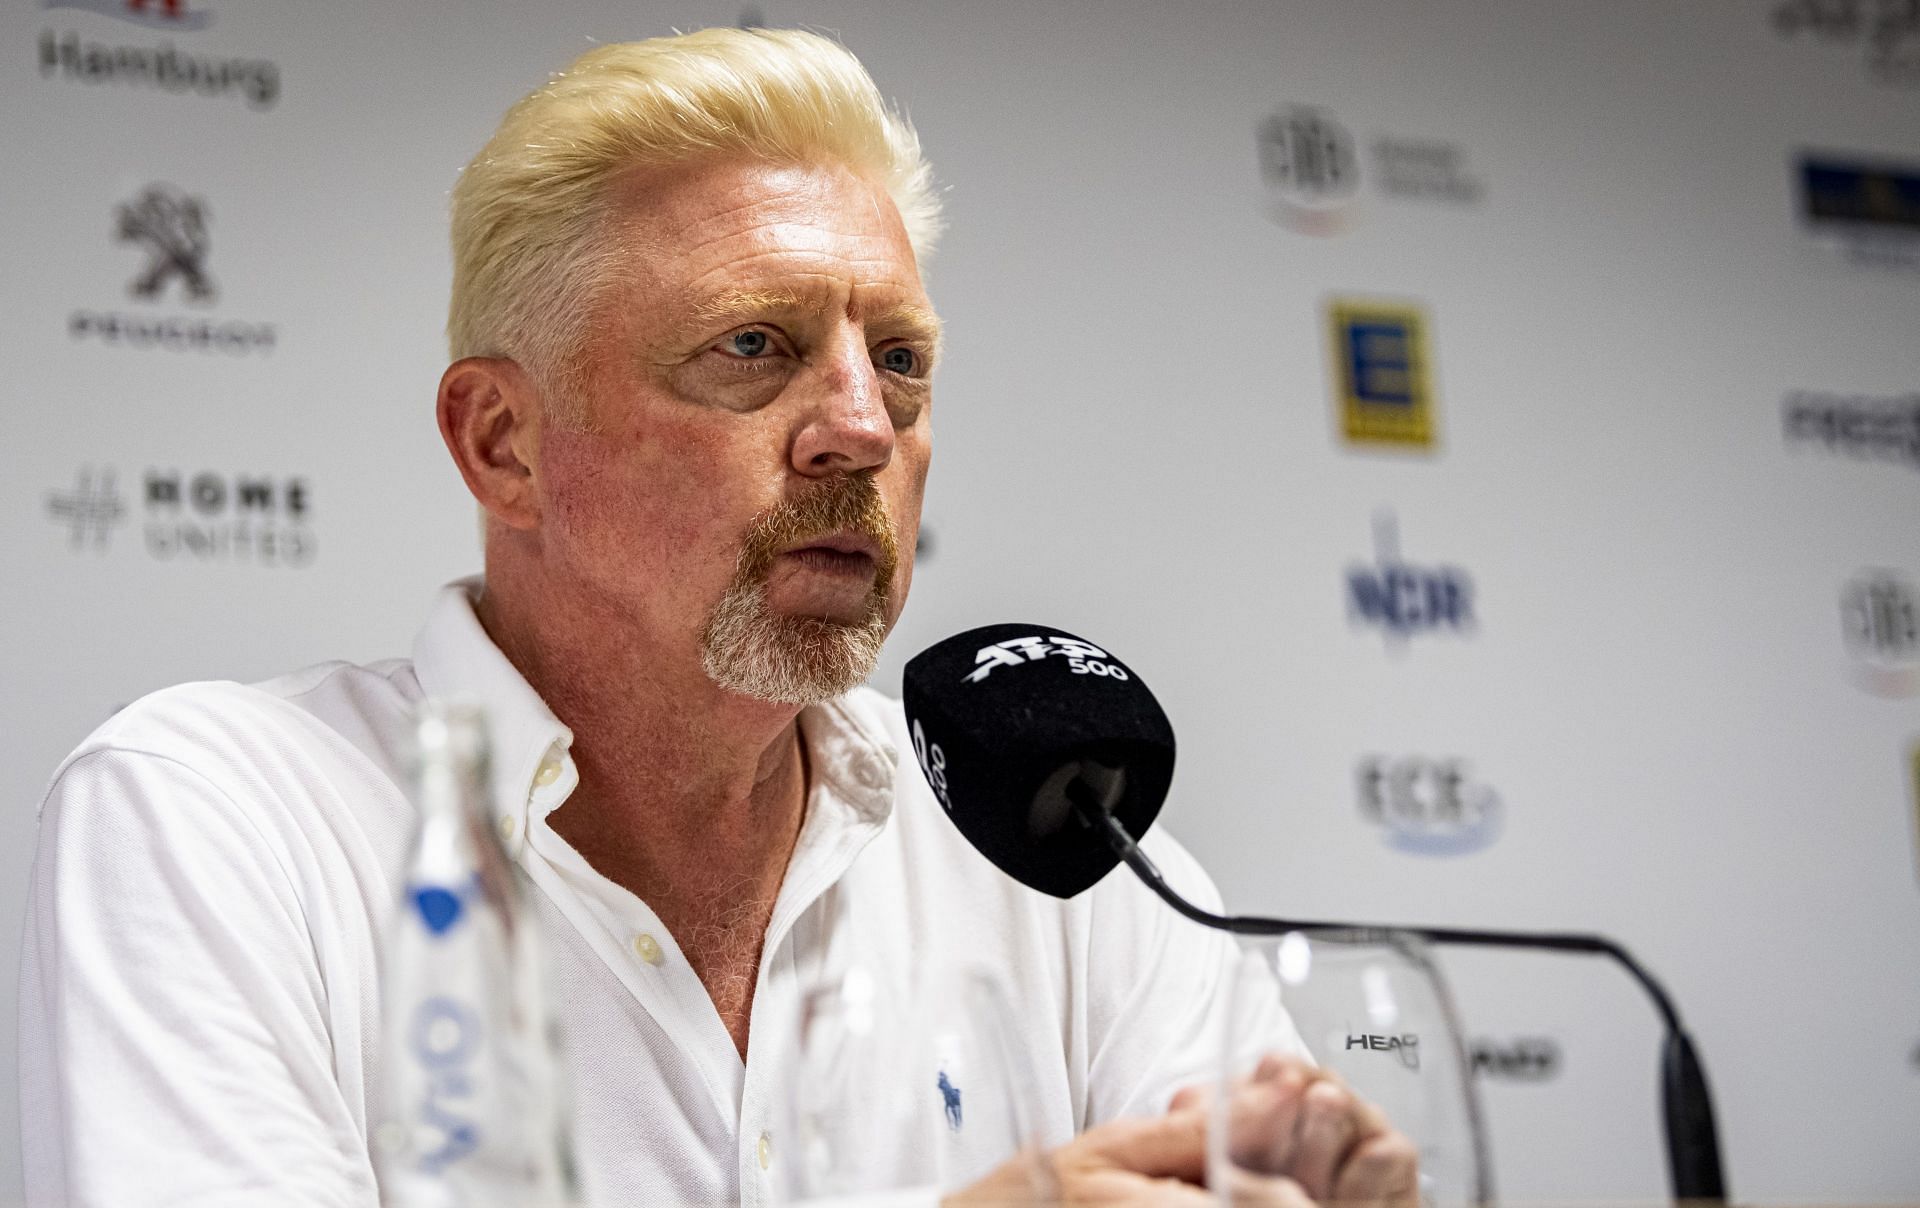 Boris Becker has been imprisoned for almost a year.